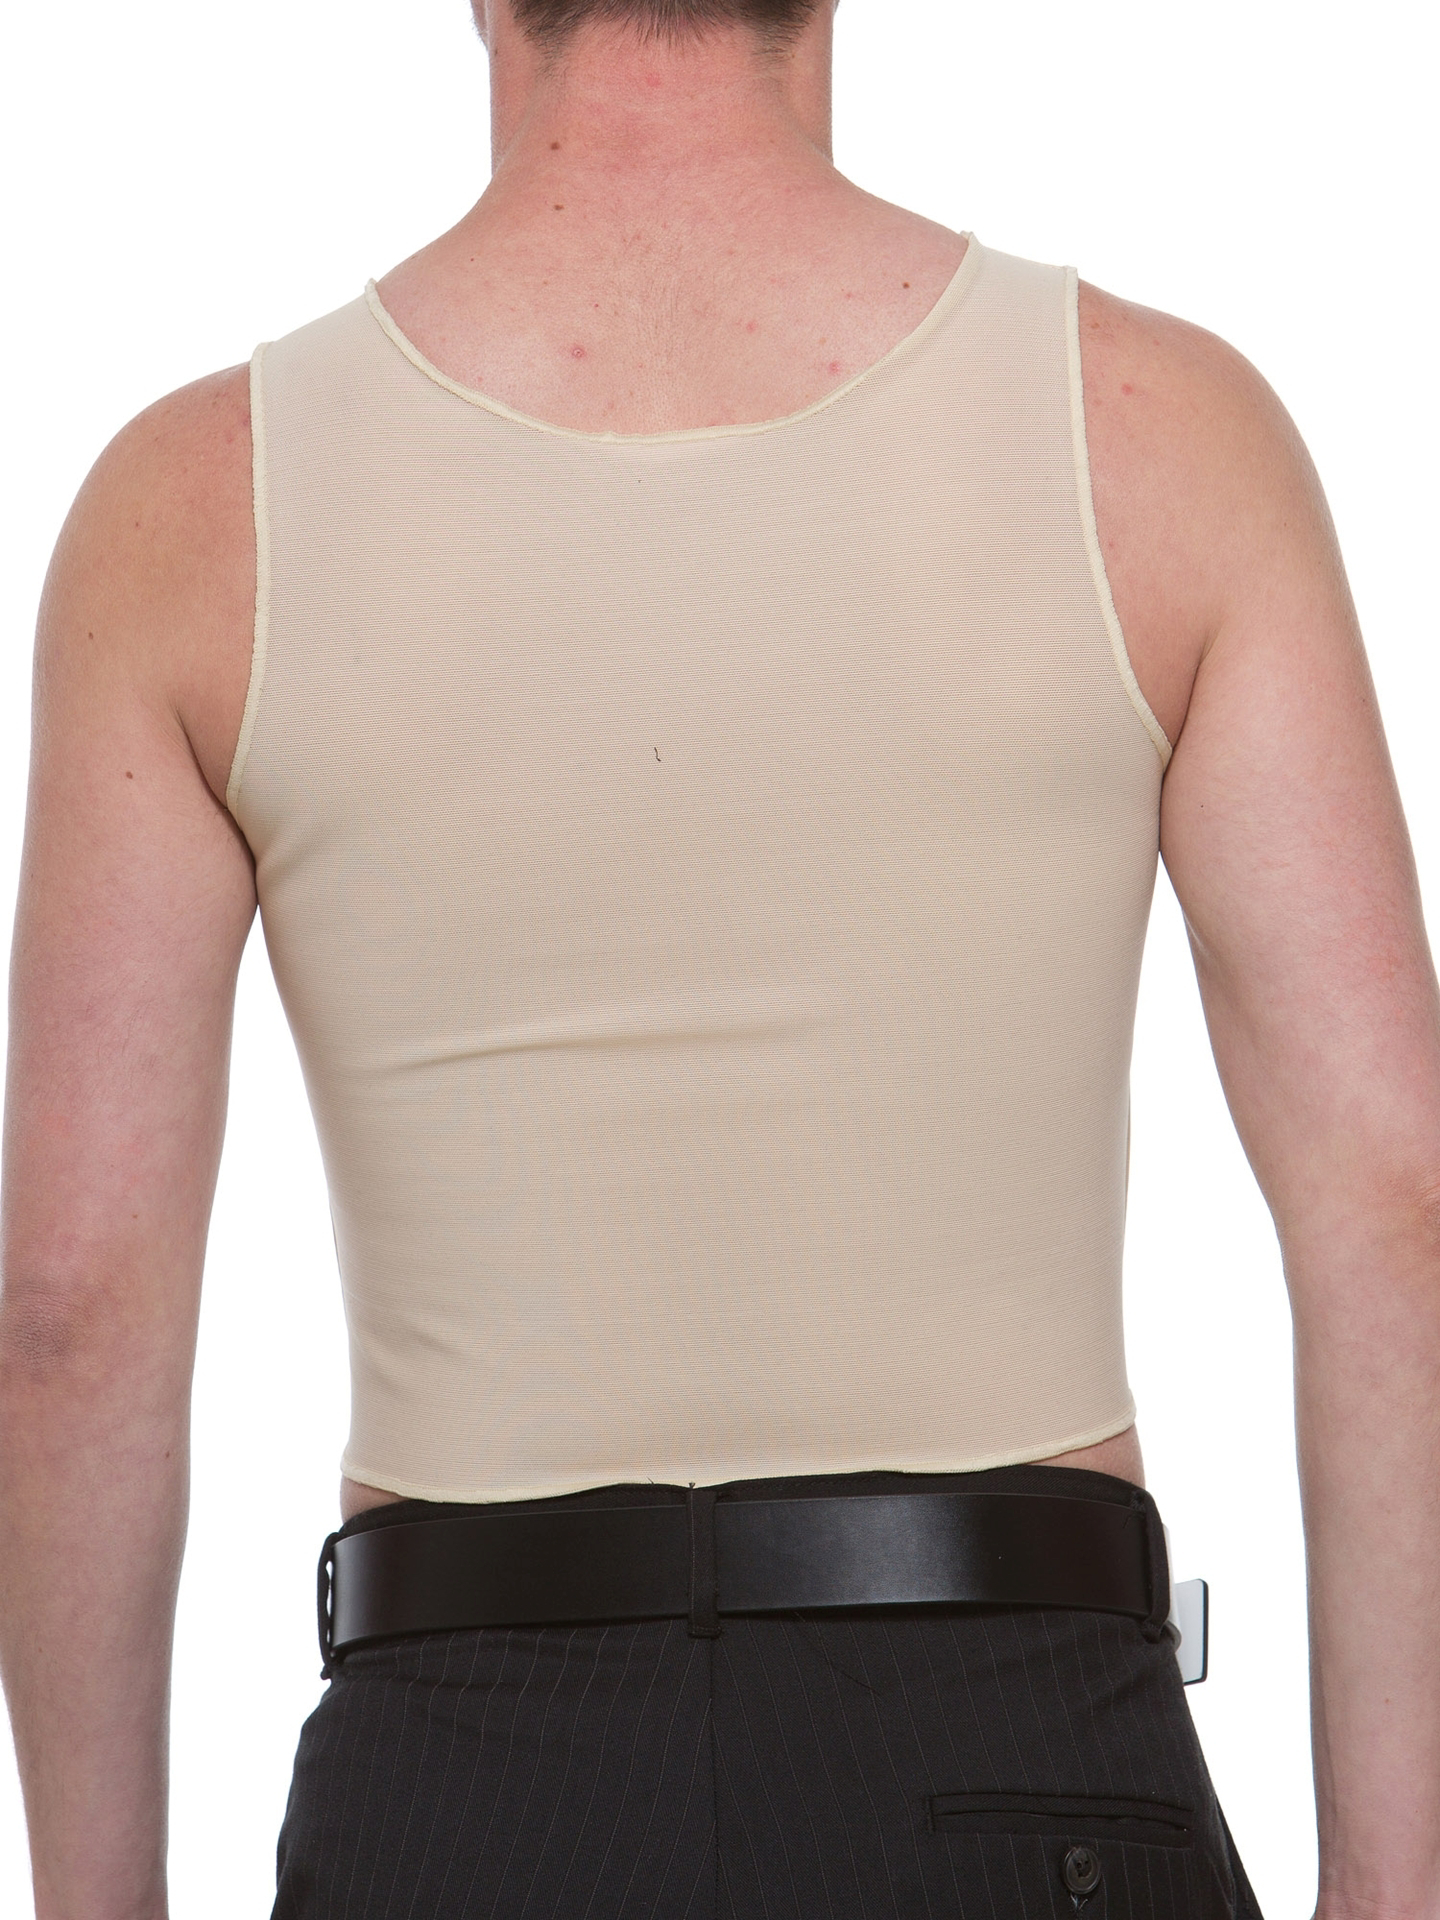 Underworks FTM Extreme Tri-Top Chest Binder Top 983 - Nude X-small :  : Office Products